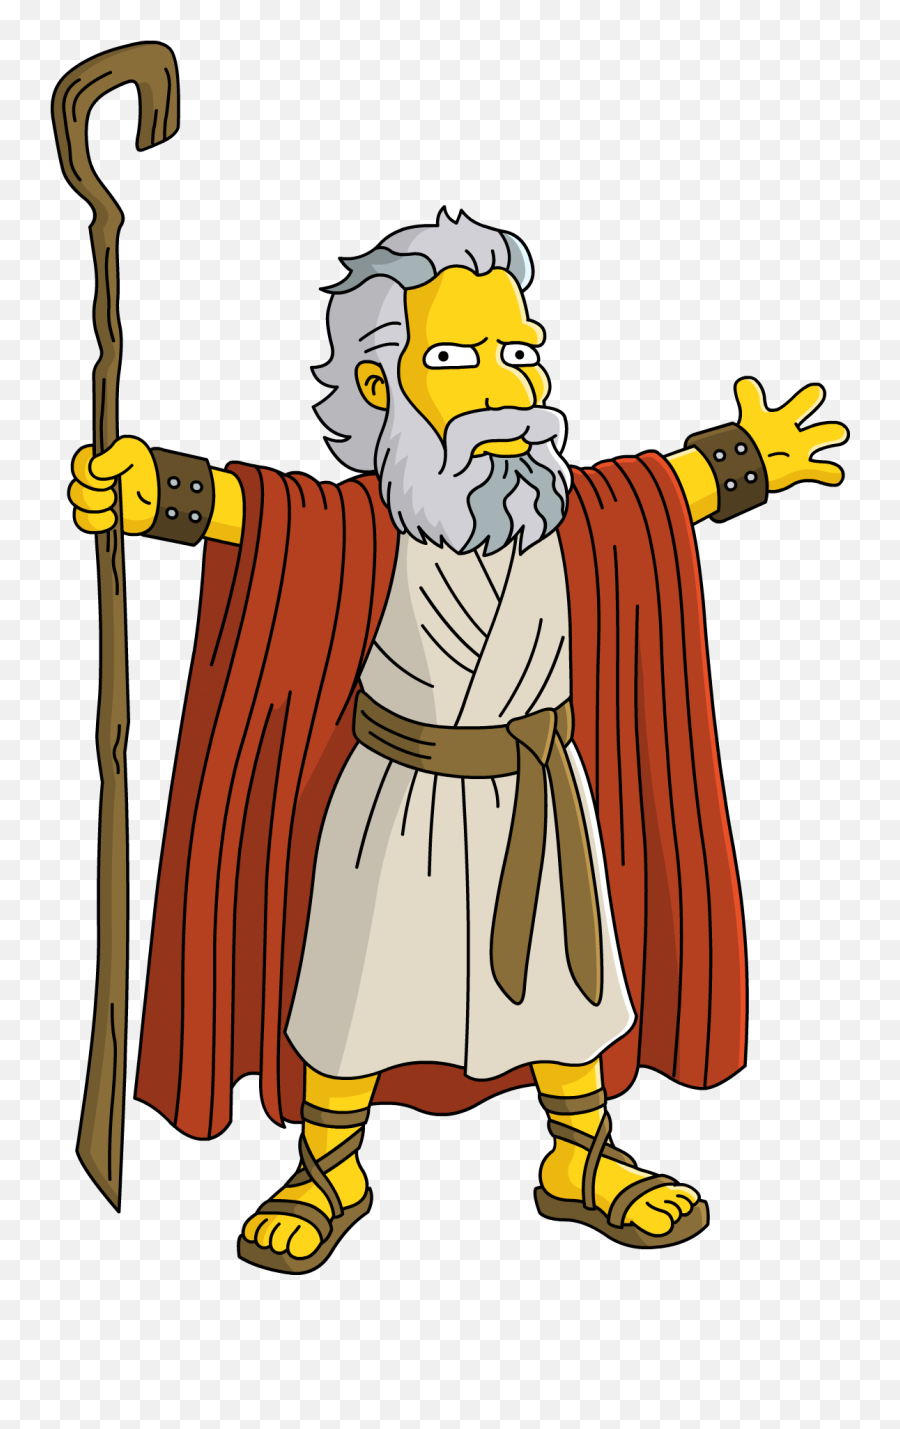 Free Donuts Last Chance Sale U2014 Ea Forums - Troy Mcclure As Moses Emoji,Thumbs Up Jewish Emoticon